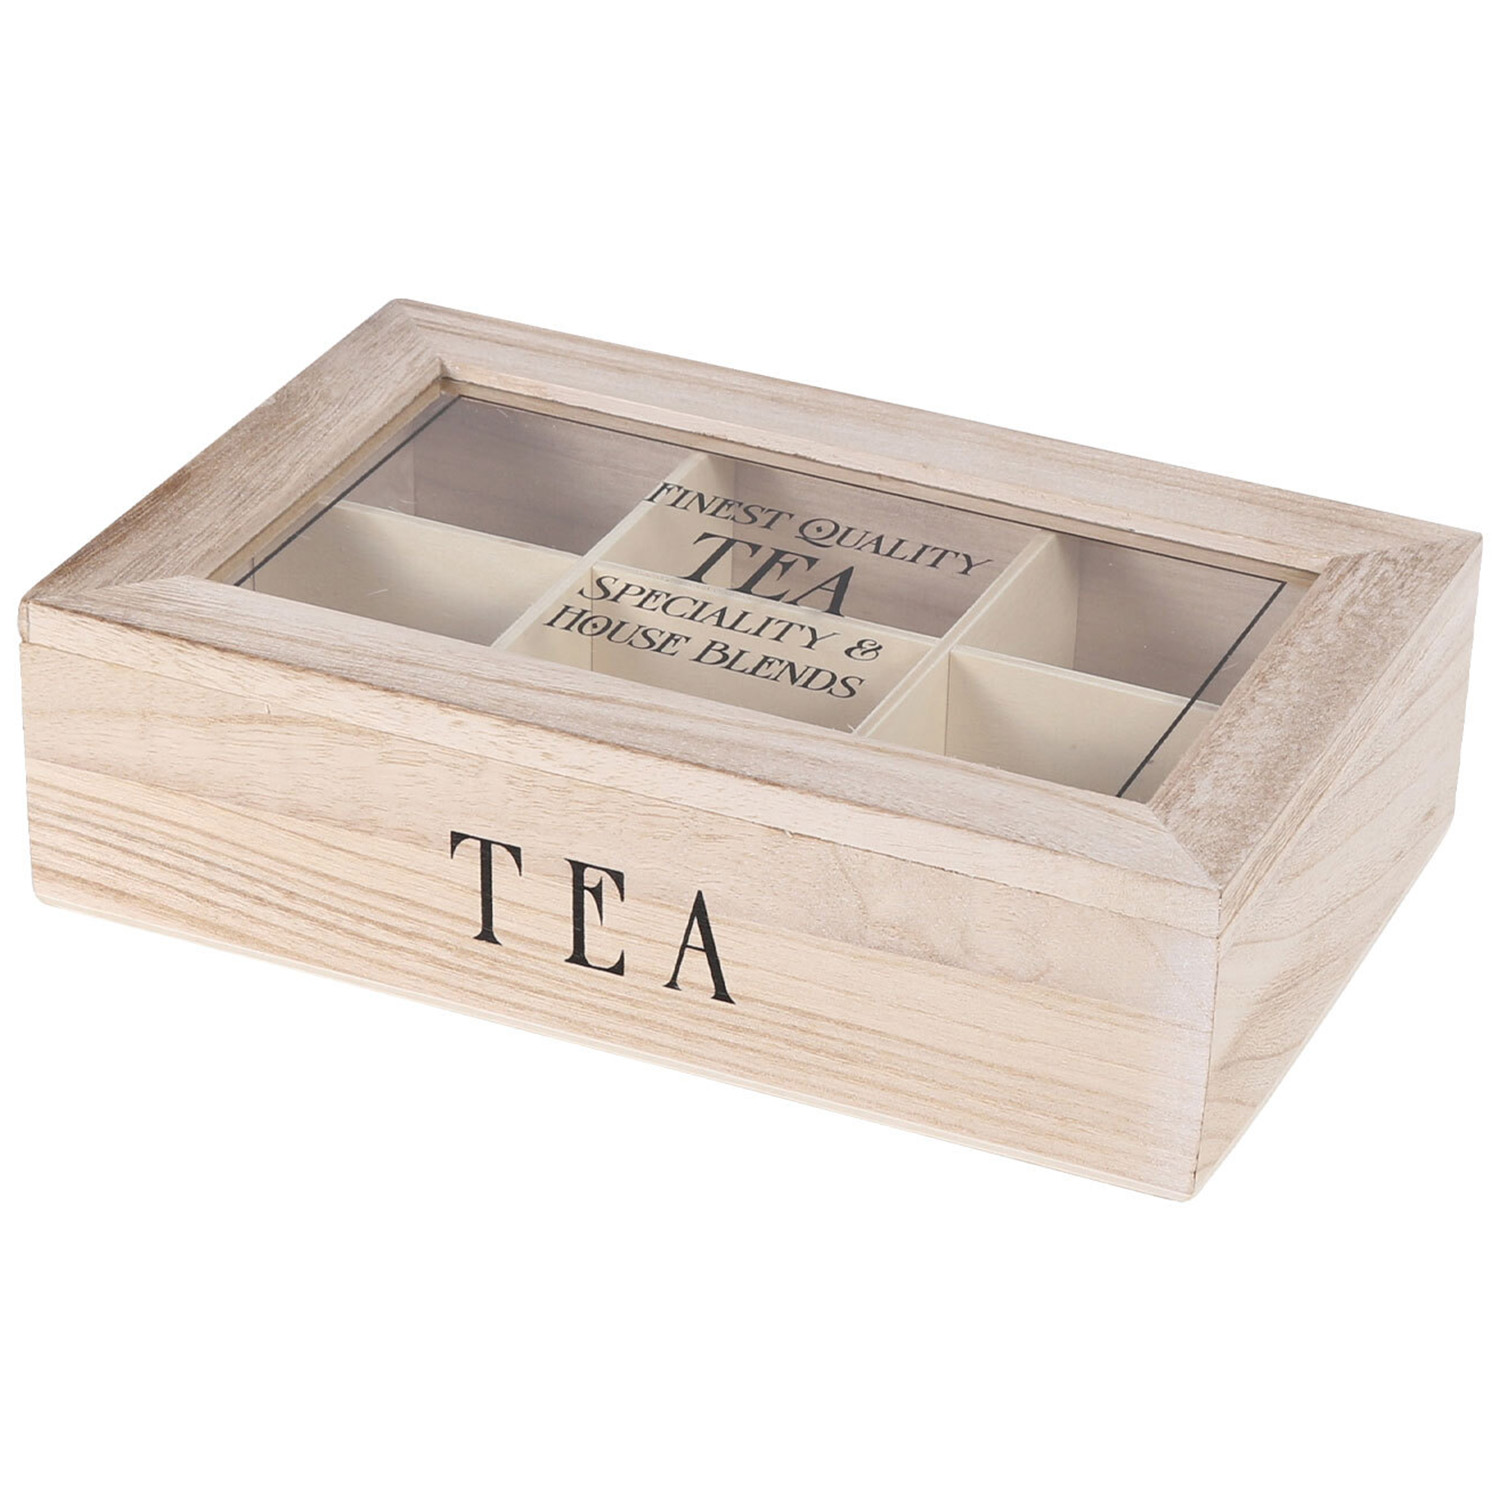 Tea Box with 6 Compartments Image 1